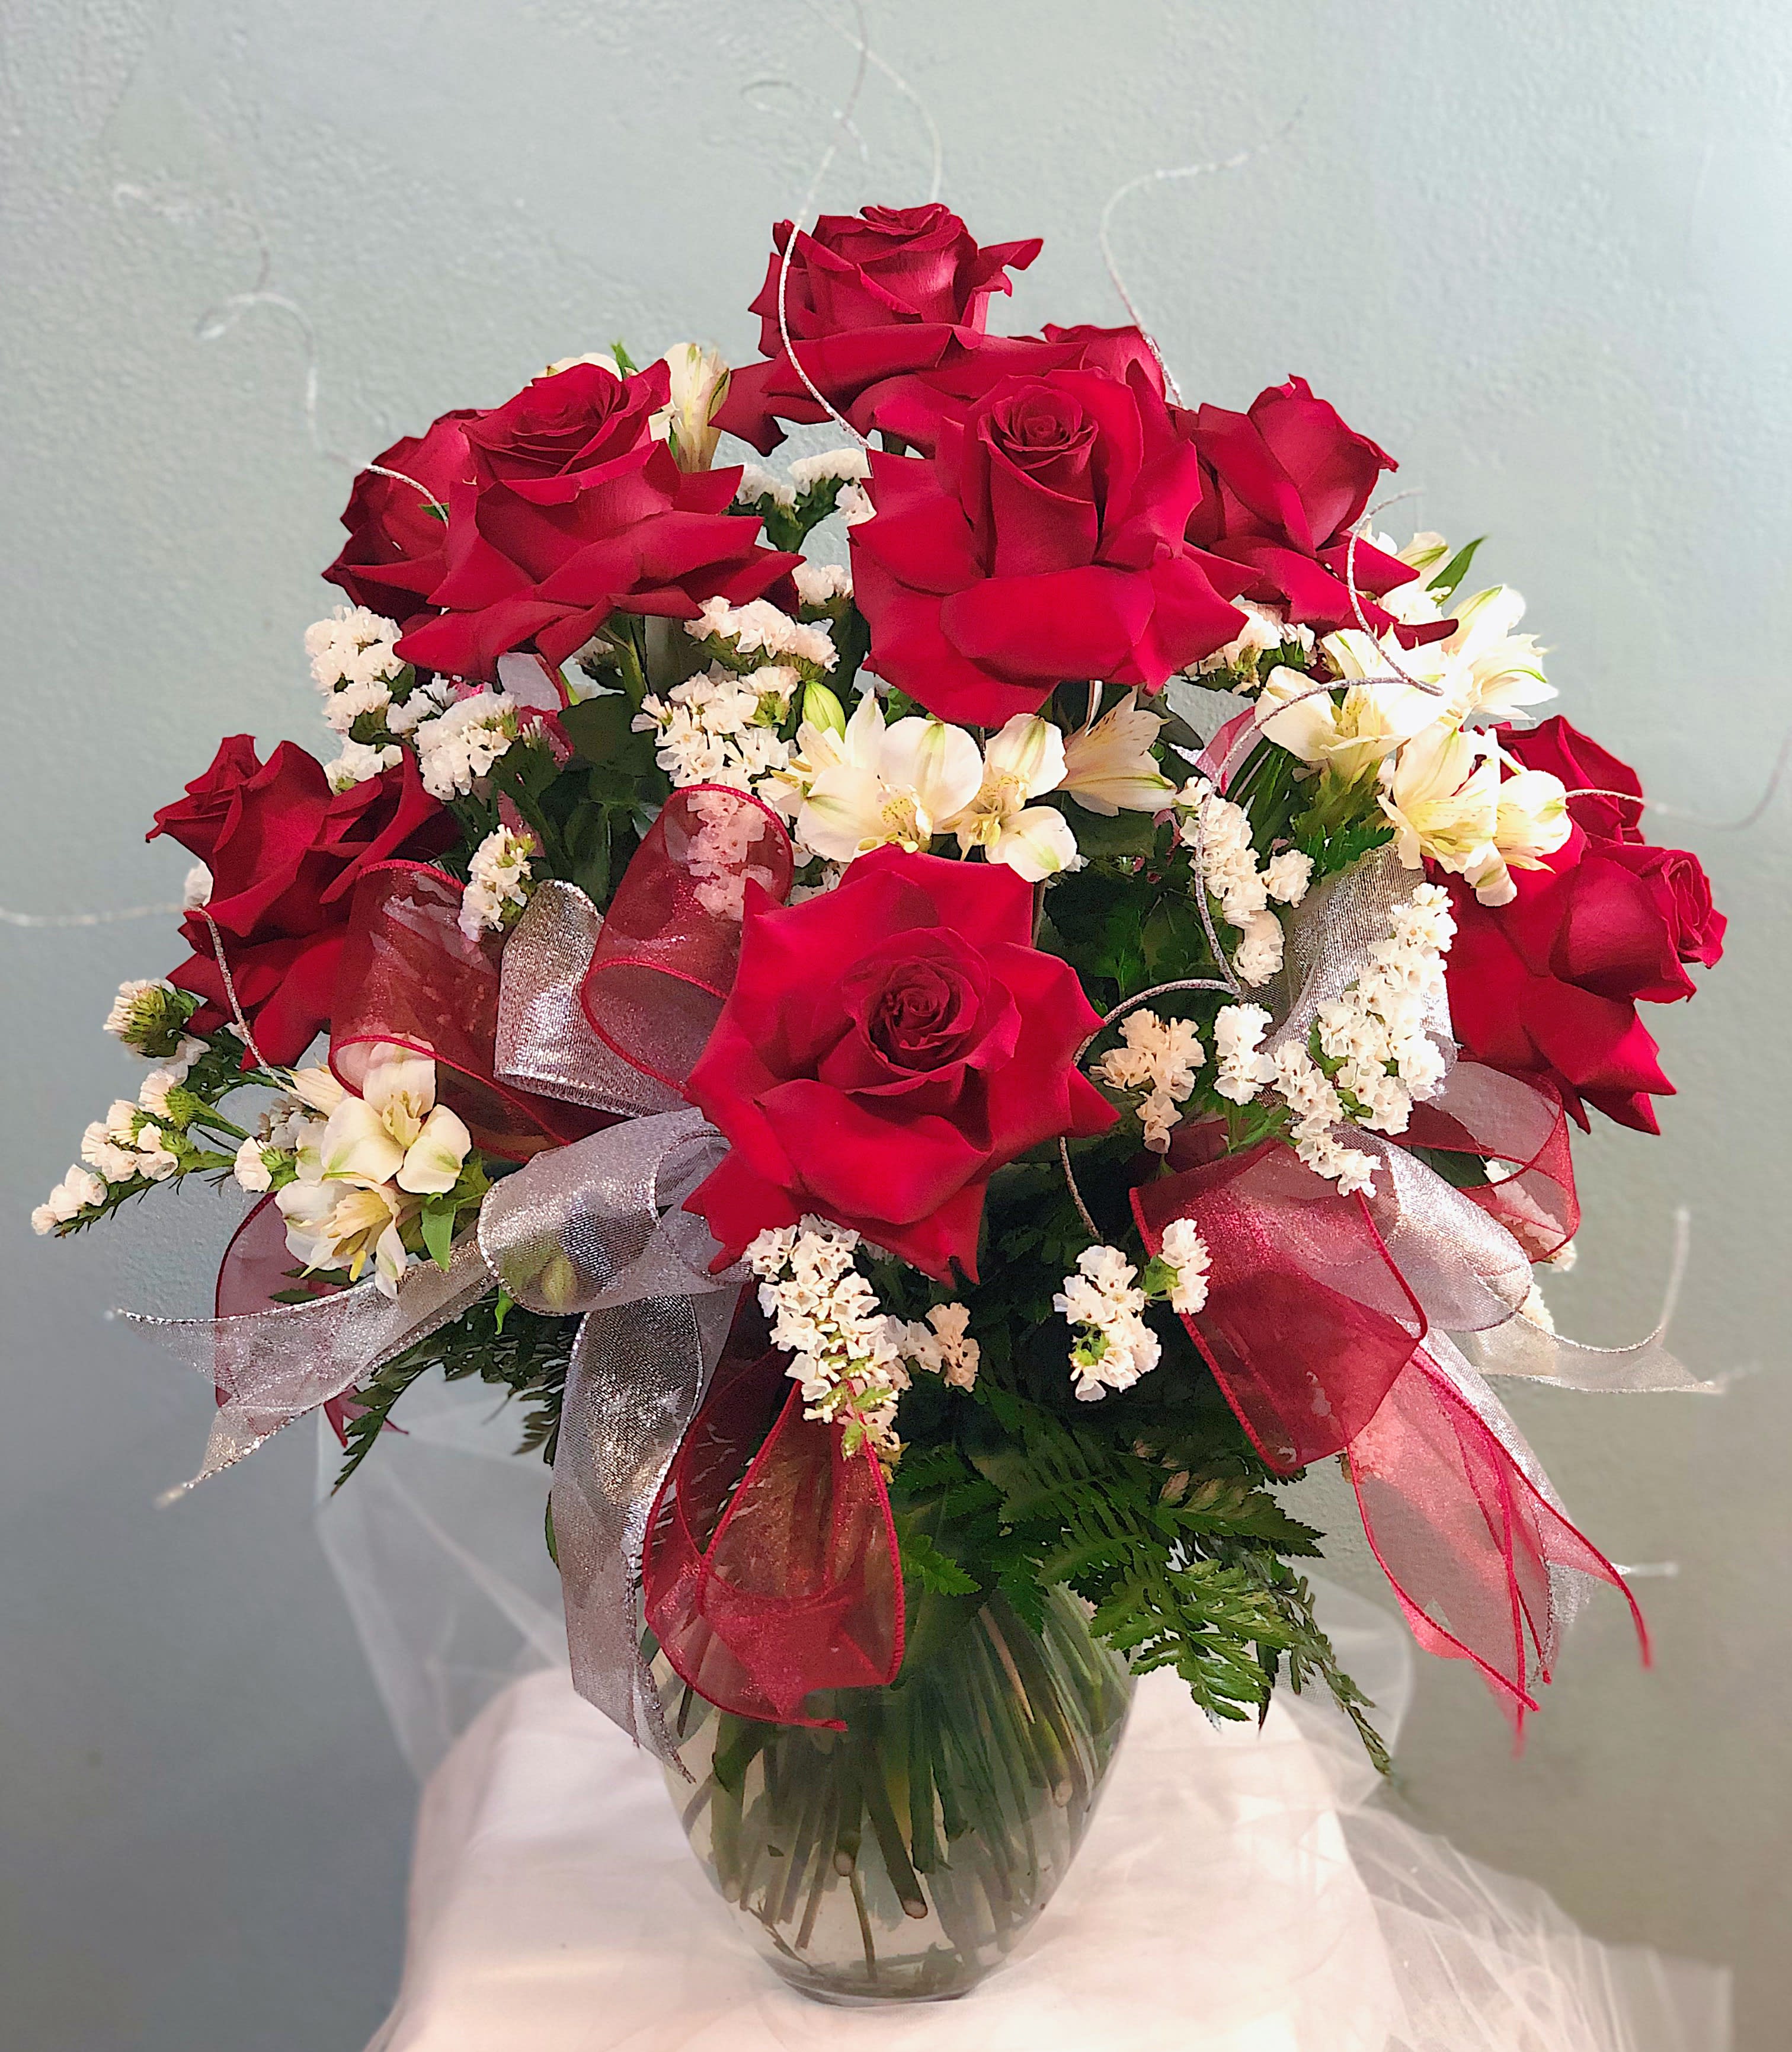 Extra Fancy Dozen Veronica Red   - A dozen (12) of red roses styled in a Veronica vase. Red roses are surrounded by two varieties of  white fill and lush greens to highlight the beauty of the rose. Double ribbon loops and multiply glitter ting stems are added for the final touches! Perfect for any occasion!